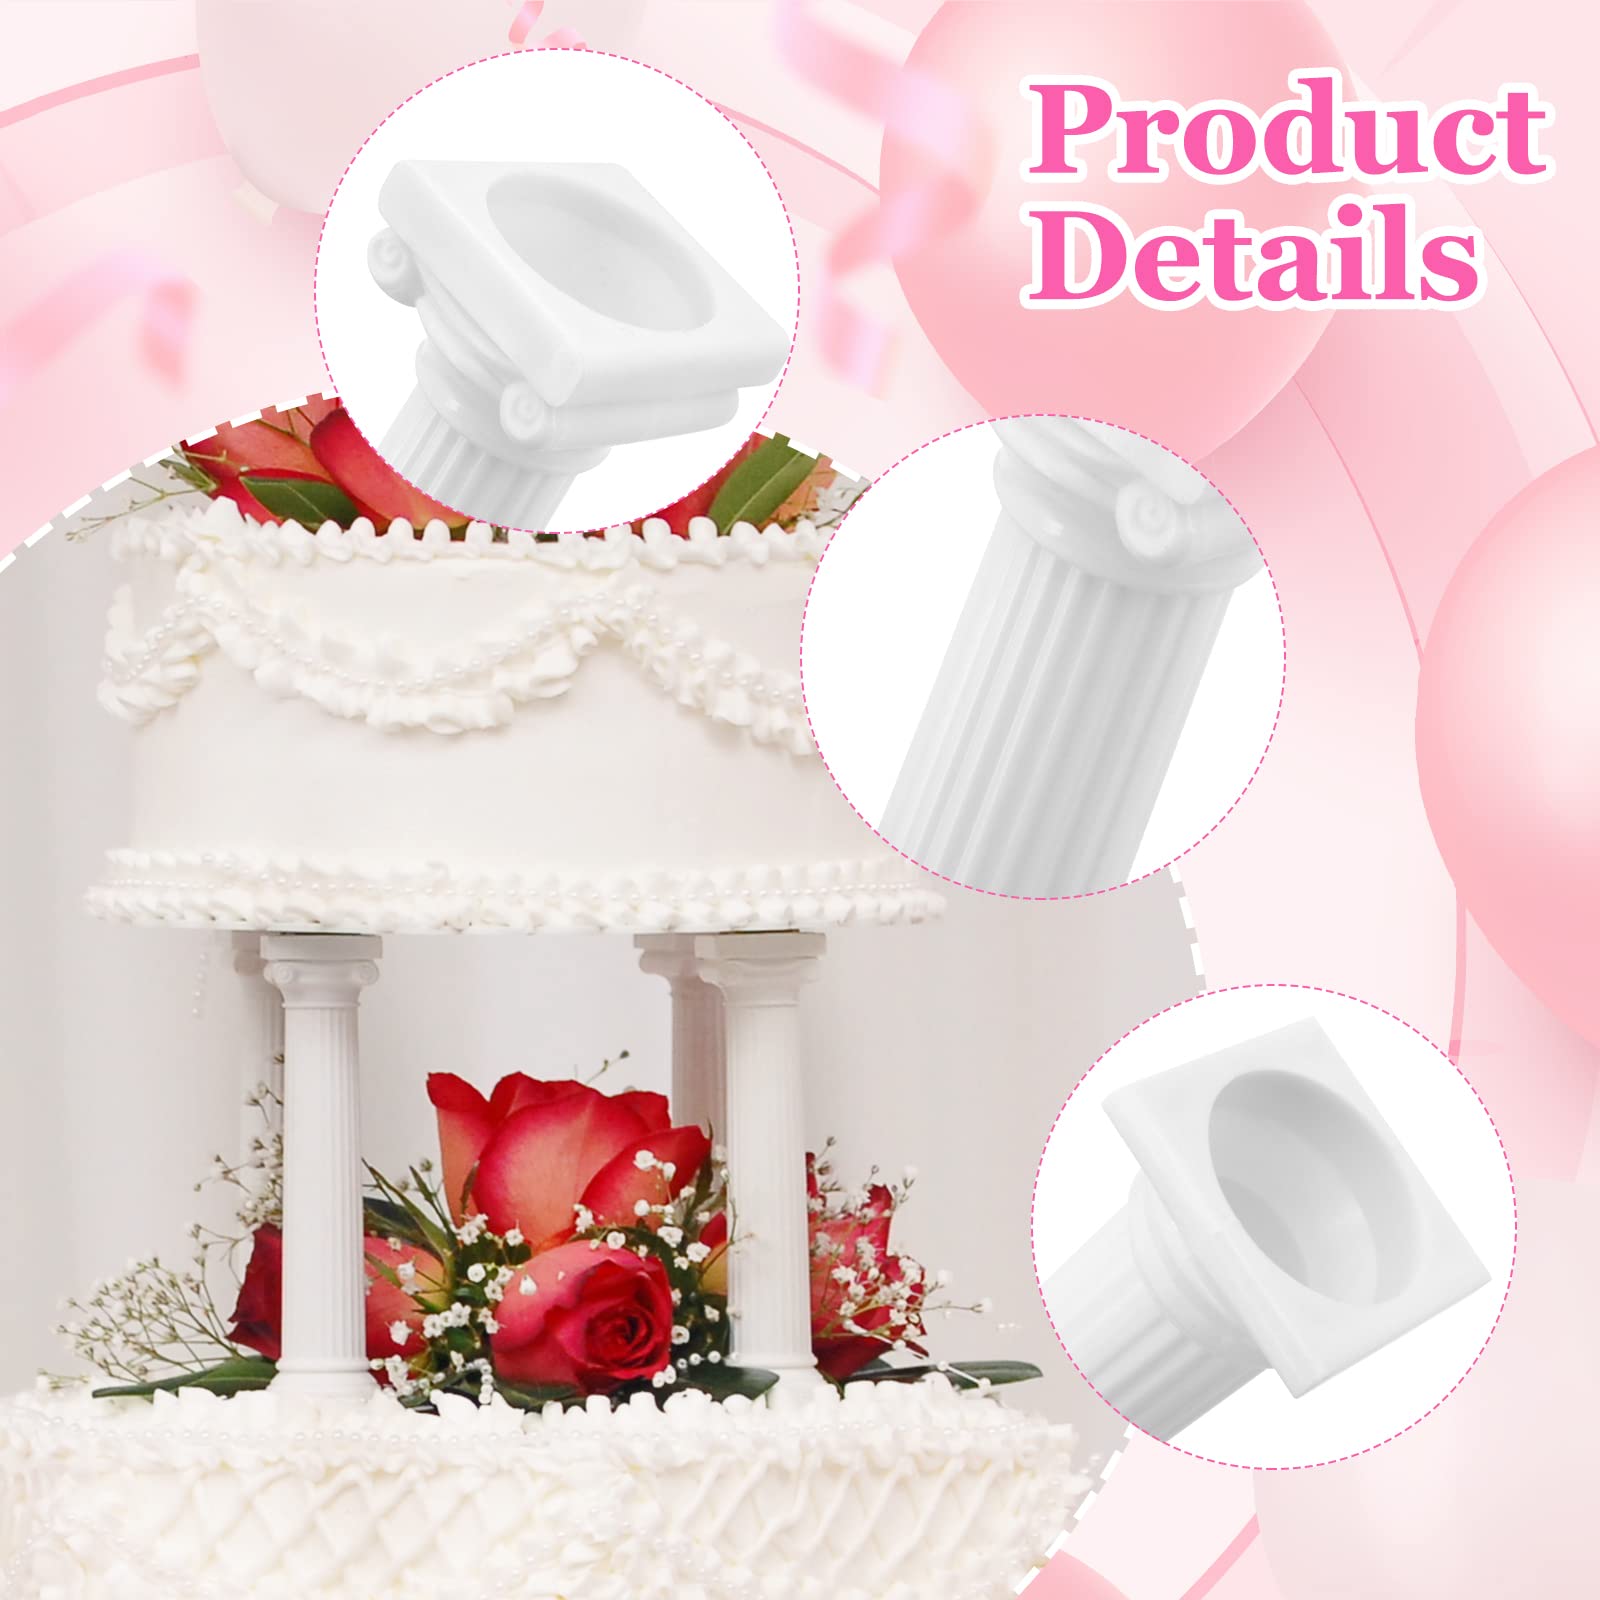 Hooshion 24 Pcs 3 Size Roman Column Cake Tiered Stands, Fondant Cakes Tier Separator Support Stand, Cake Pillars for Wedding Cakes, Multilayer Wedding Cake Decoration Support Tool Sets